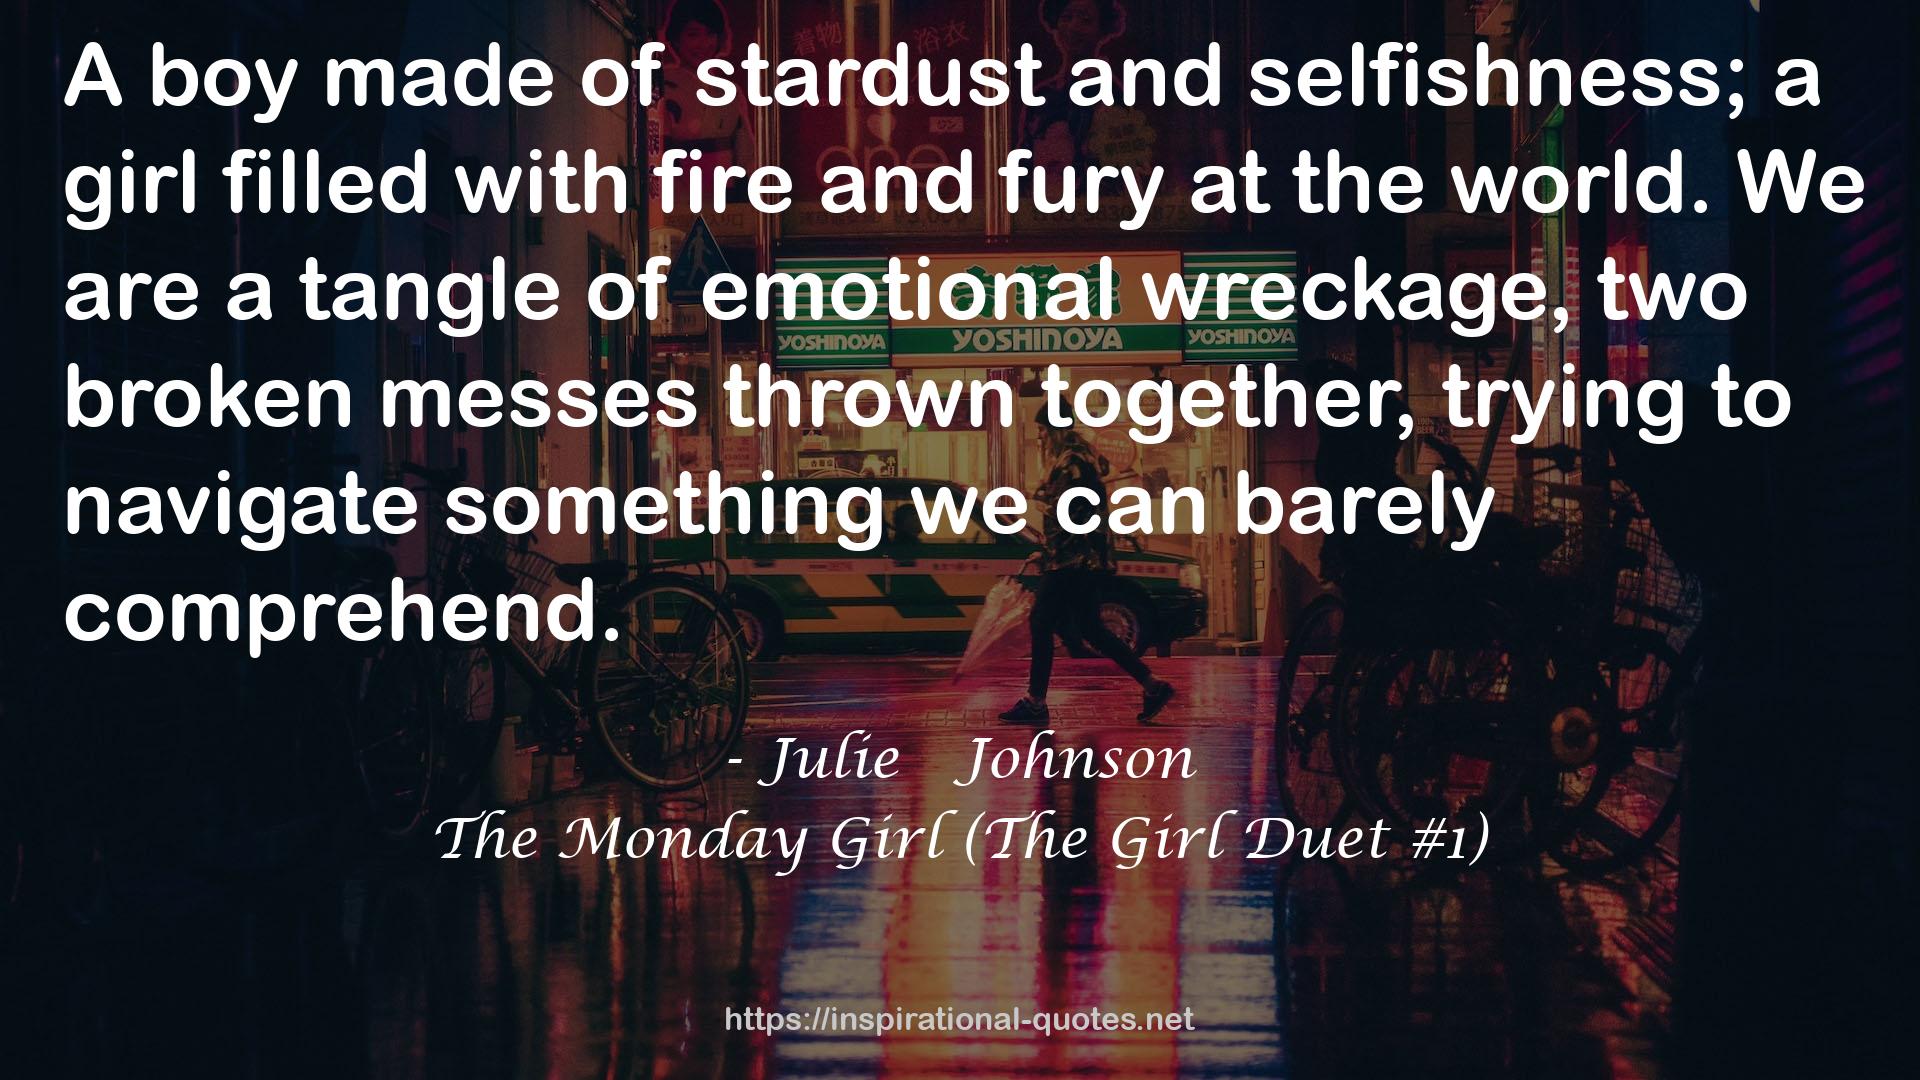 The Monday Girl (The Girl Duet #1) QUOTES